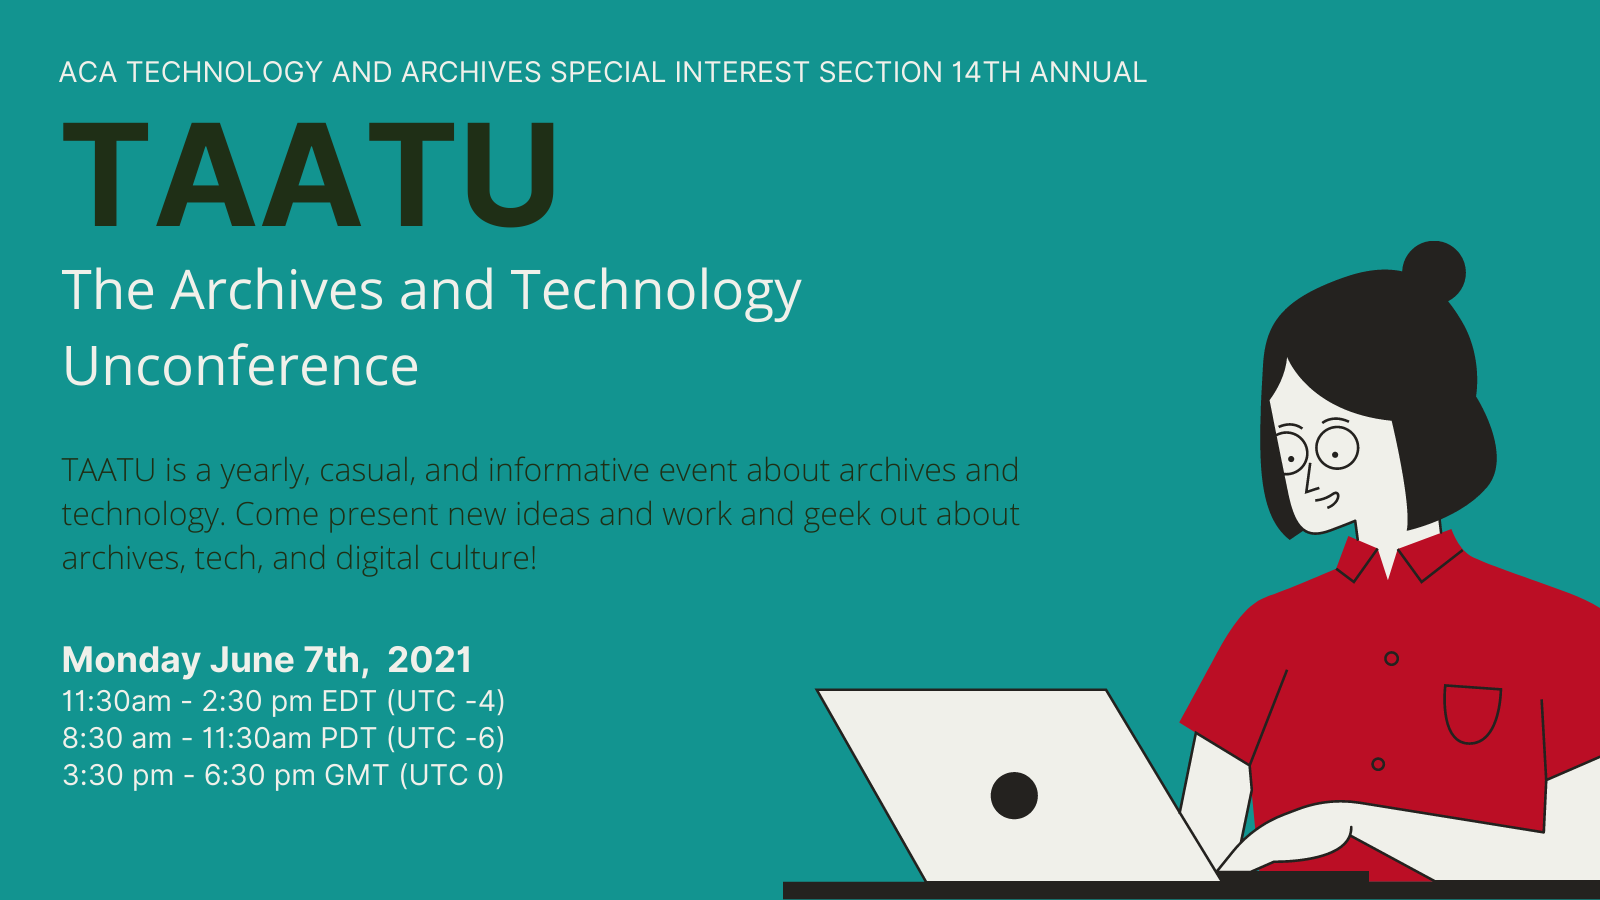 Postr for The Archives and Technology Unconference with same details as text